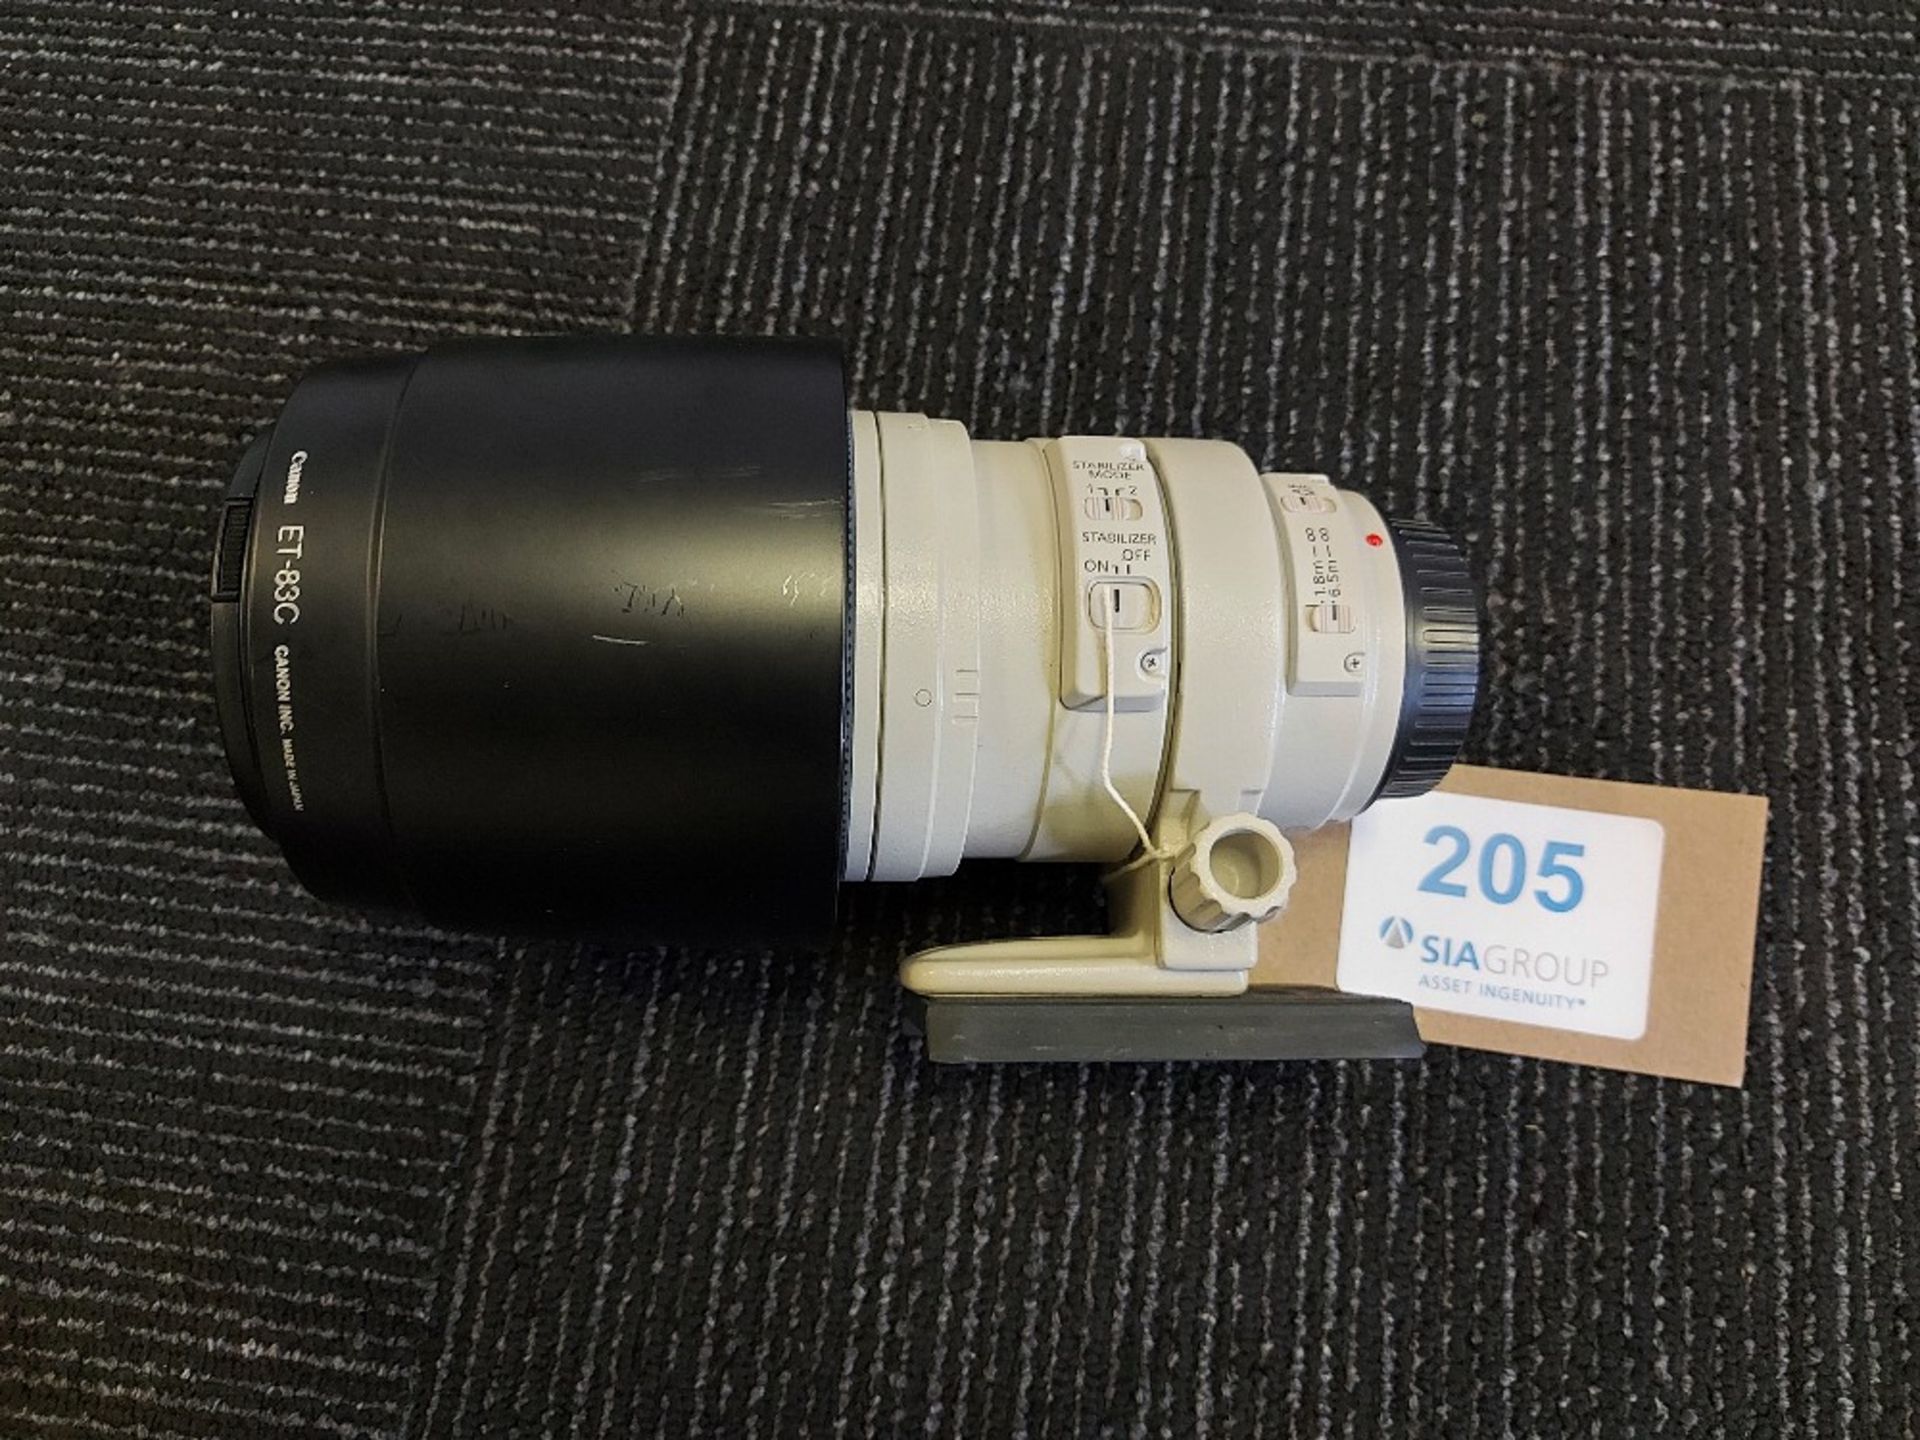 Canon Zoom EF 100-400mm 1:4.5-5.6 L IS USM lens attachment